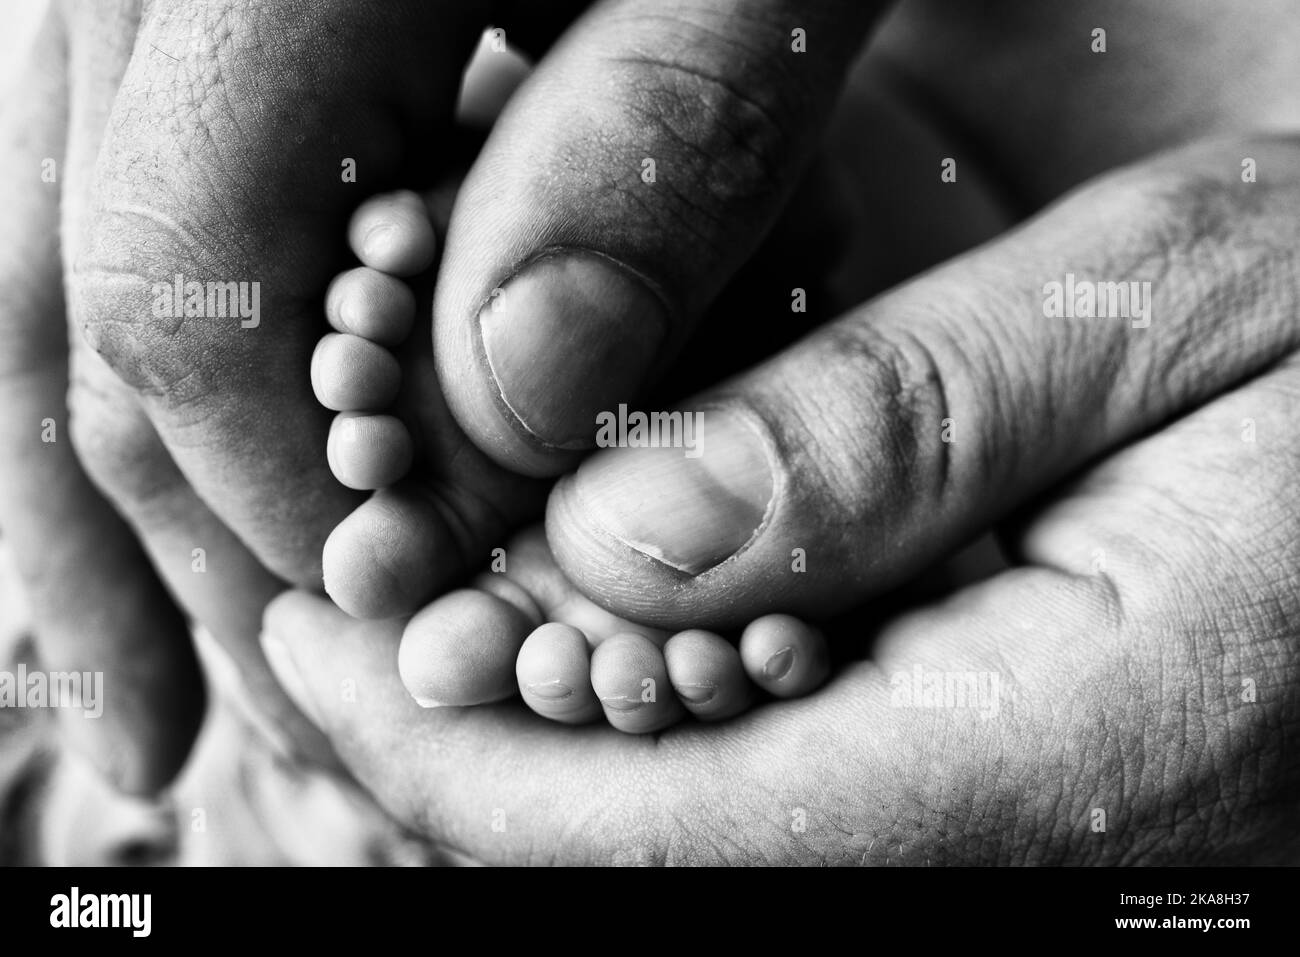 Mother is doing massage on her baby foot. Prevention of flat feet, development, muscle tone, dysplasia.  Stock Photo